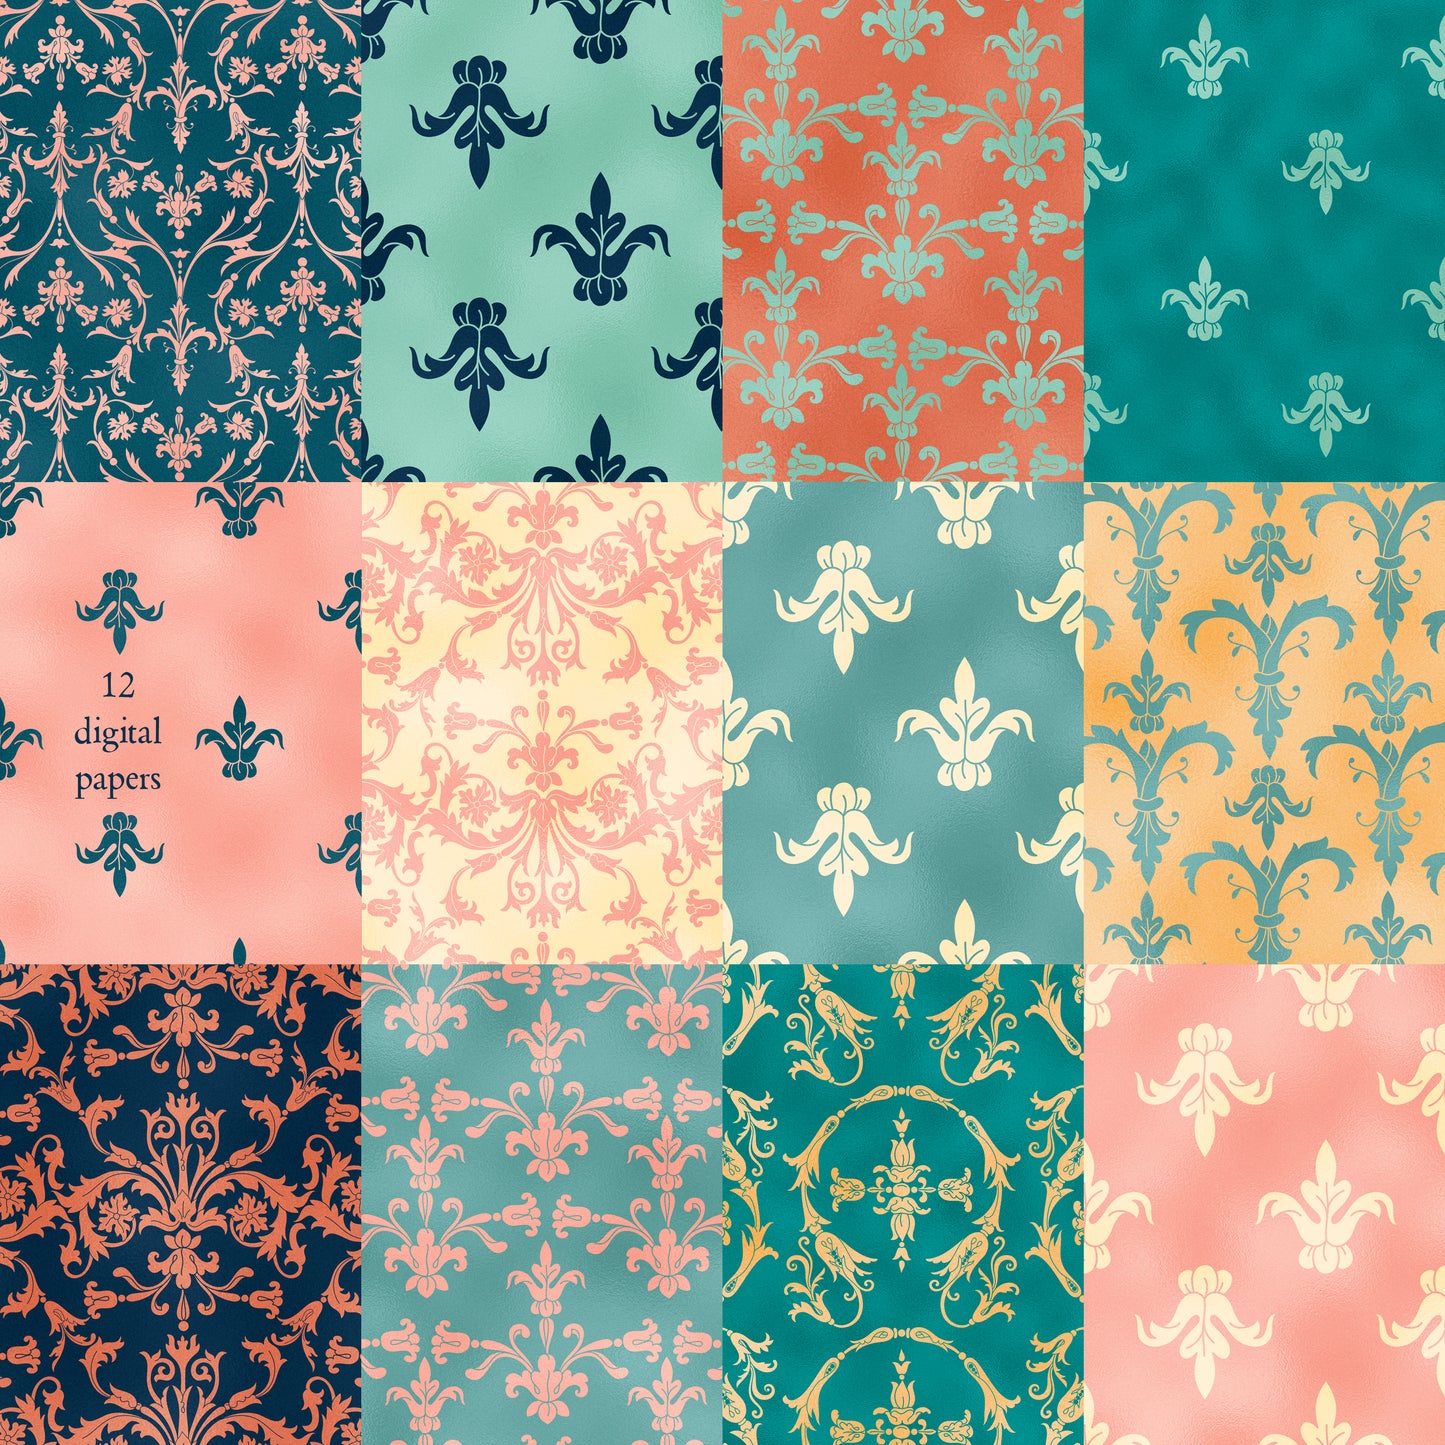 DAMASK Graphic Collection